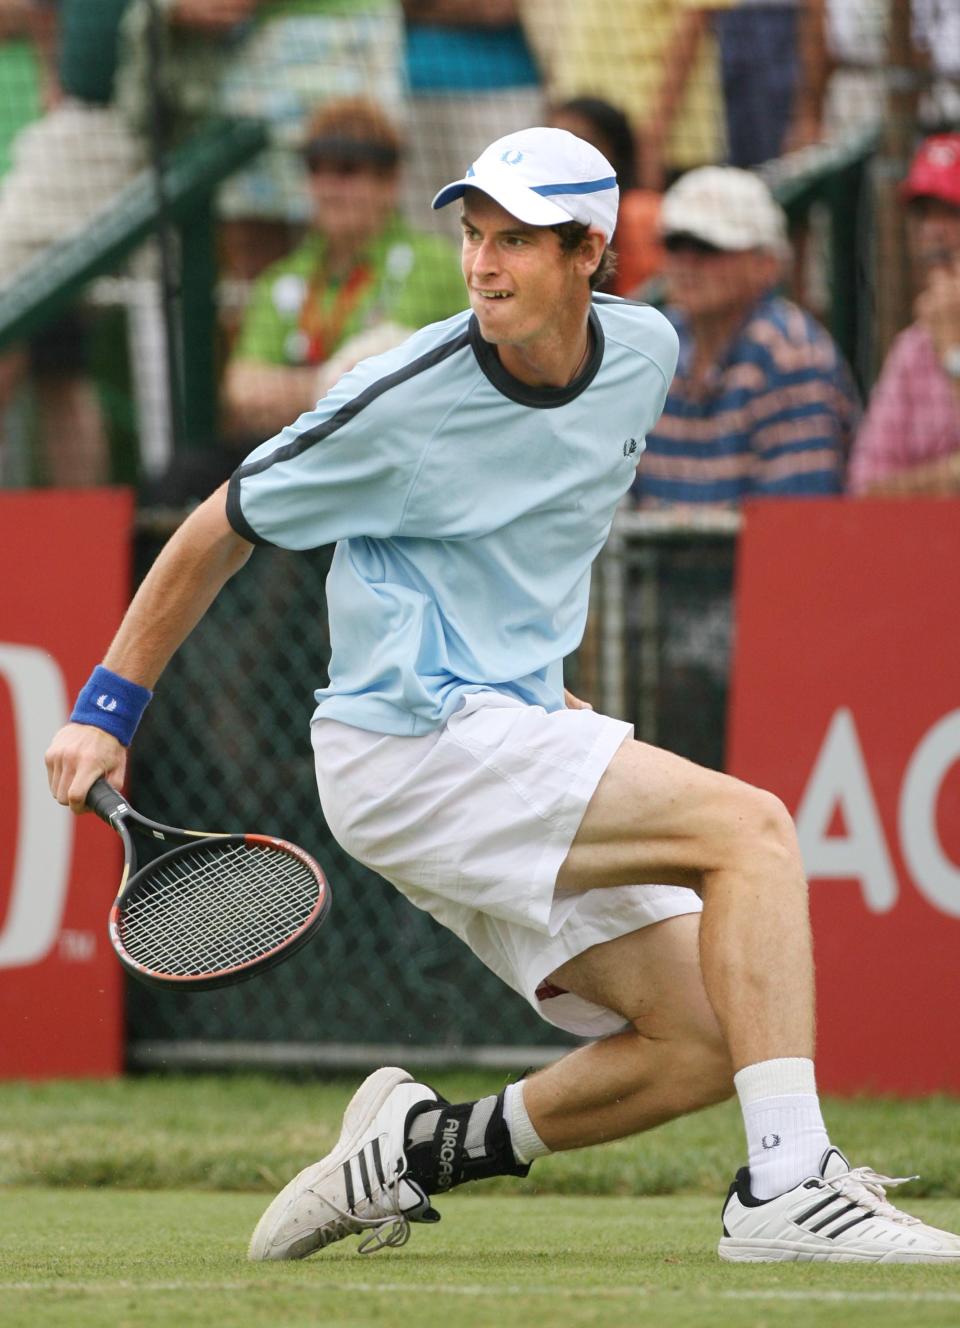 Andy Murray returns a shot during his match against Ricardo Mello in 2006.